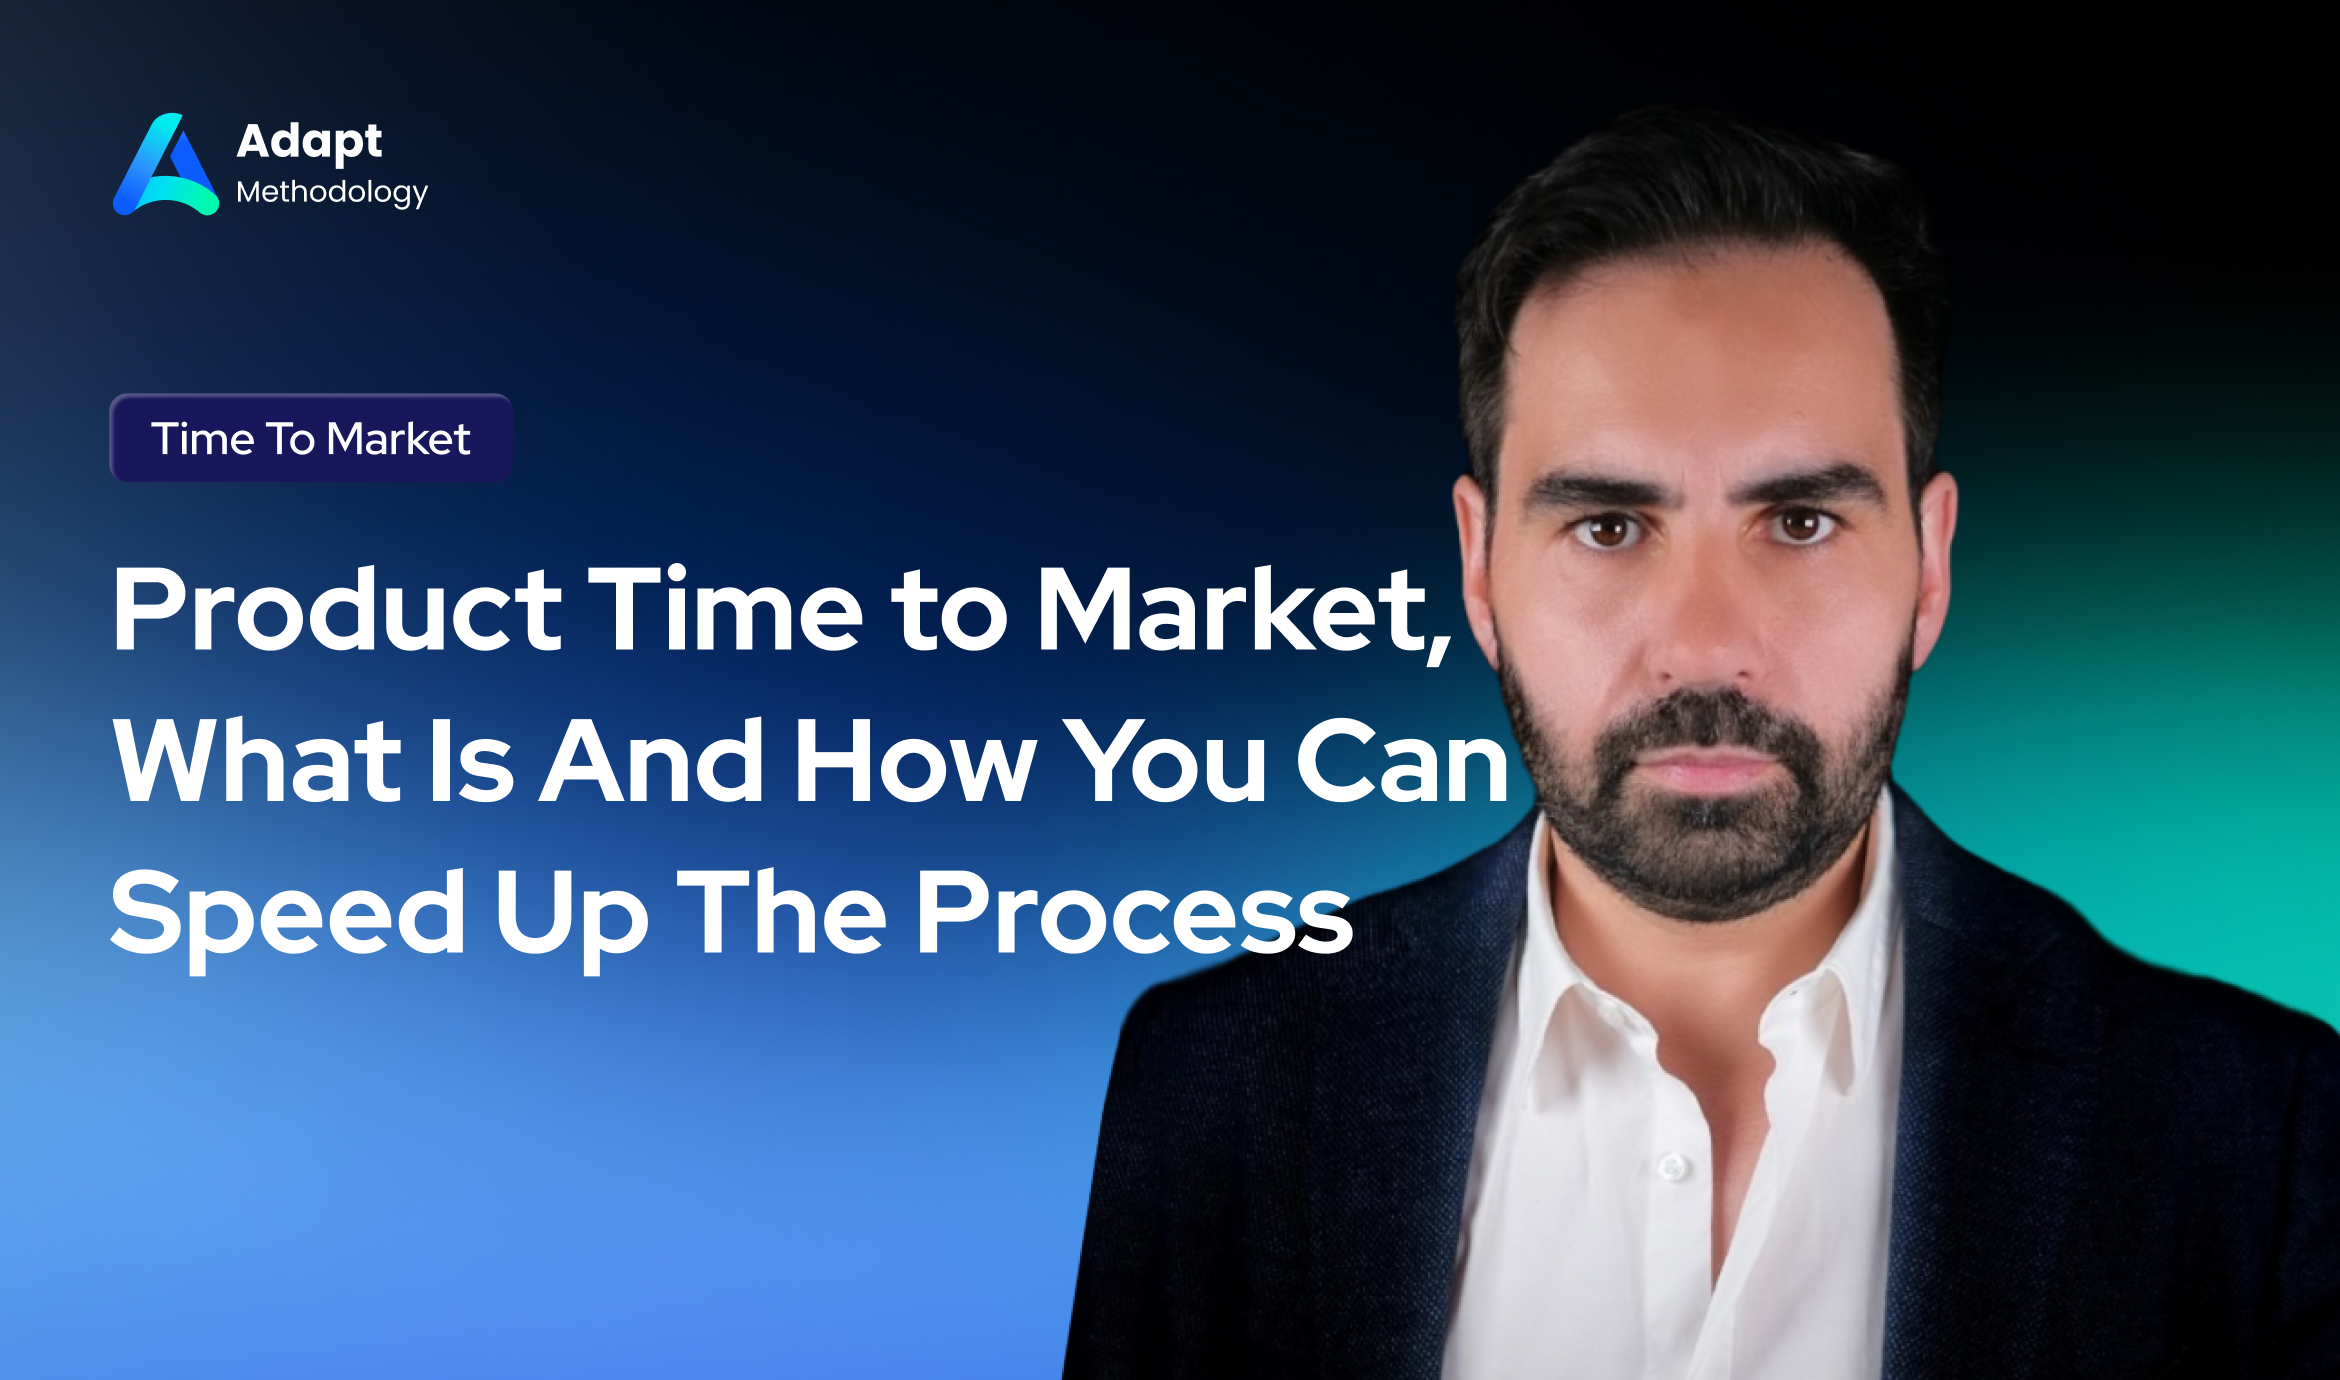 Product Time to Market, What Is And How You Can Speed Up The Process